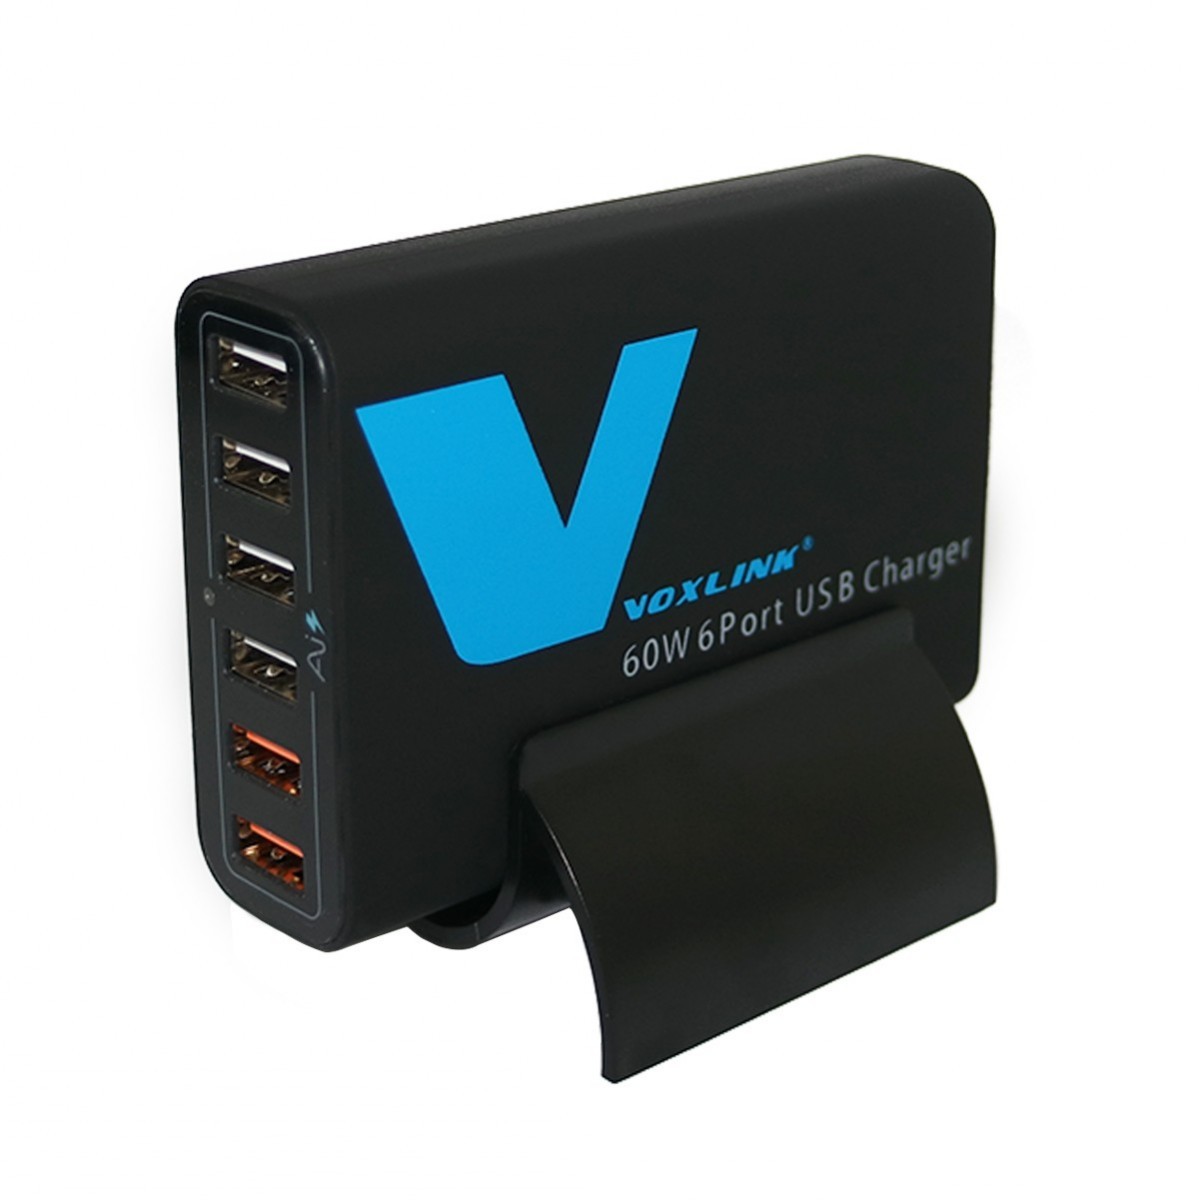 Colorful VOXLINK Quick Charge 2.0 Technology USB Charger, 6-ports USB Charger